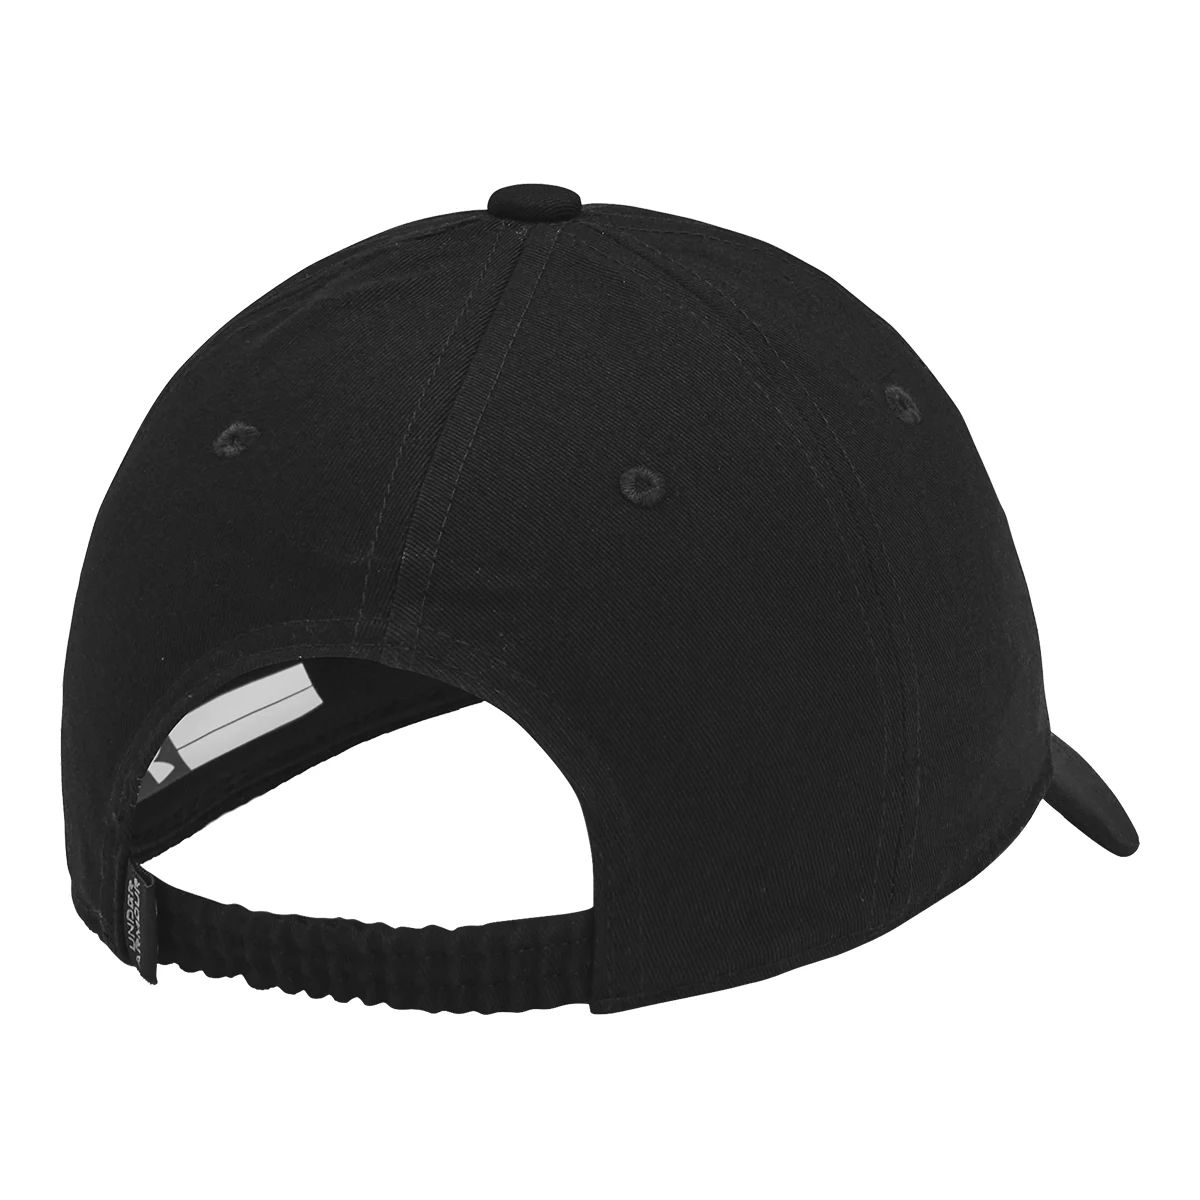 Under Armour Youth Boys' Project Rock Hat